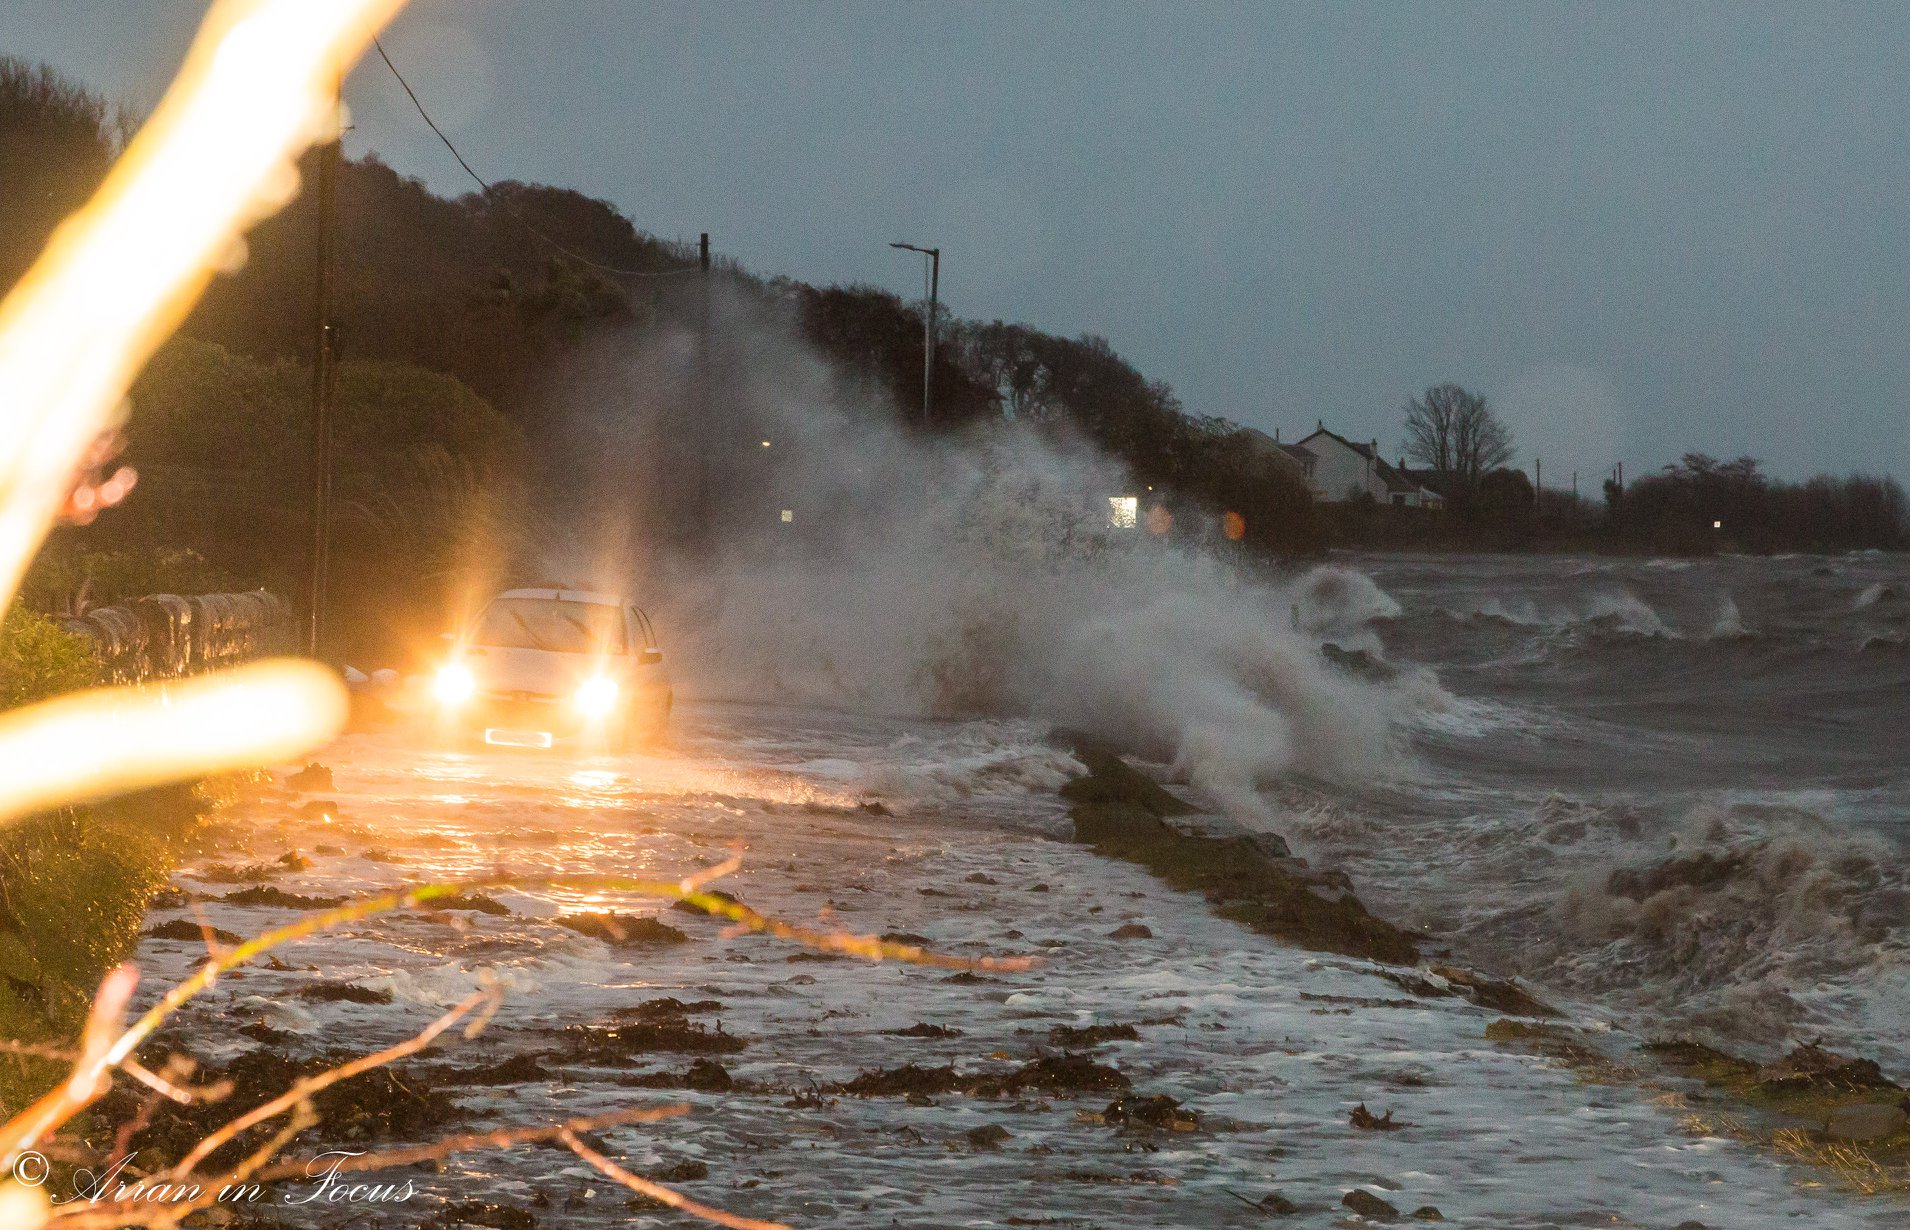 A car avoids surging waves on the Isle of Arran. (Arran in Focus Facebook Page.)